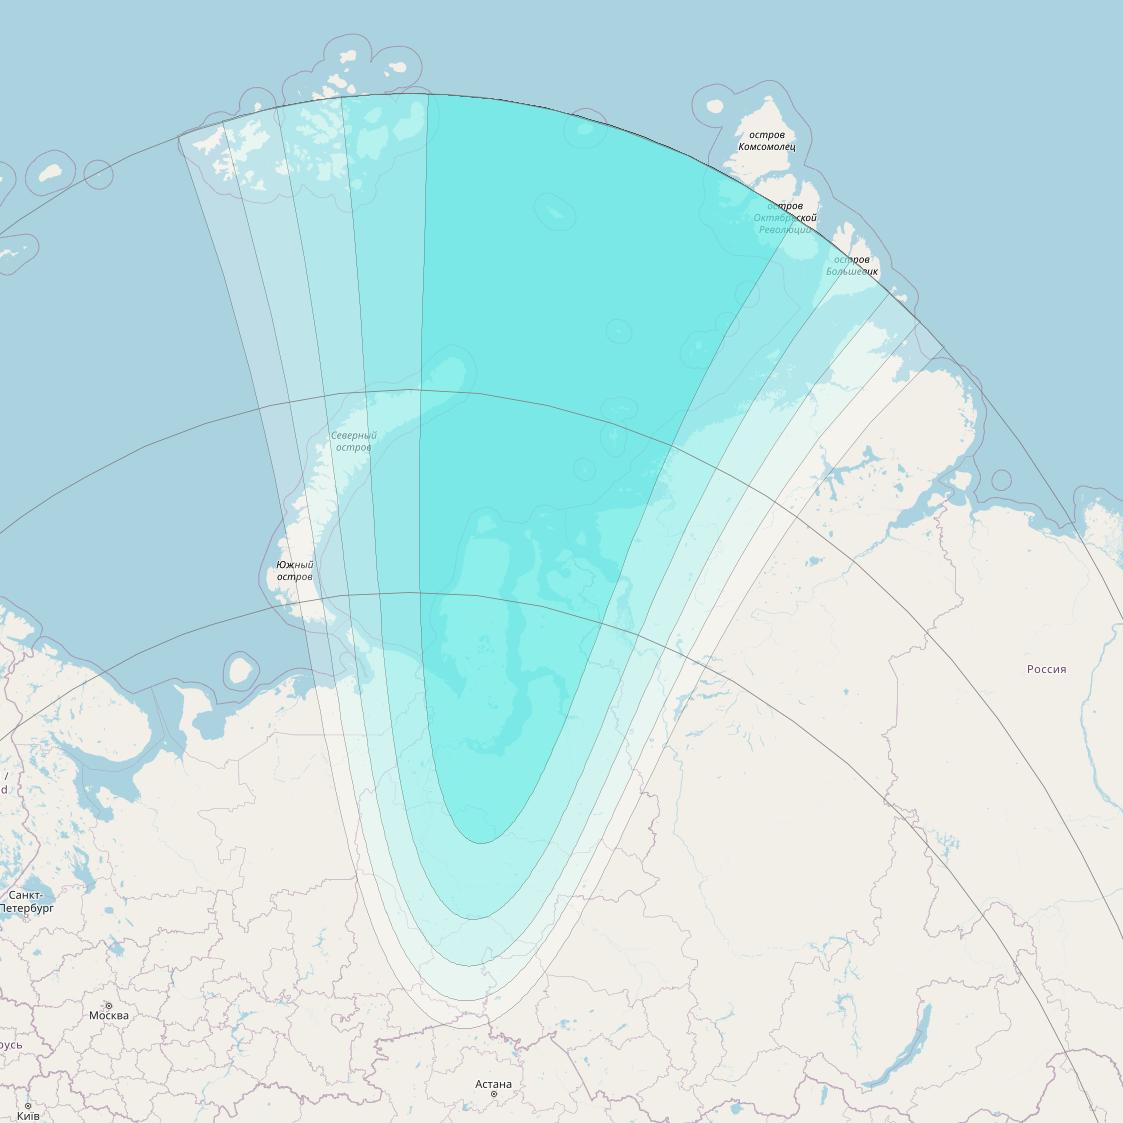 Inmarsat-4F2 at 64° E downlink L-band S111 User Spot beam coverage map